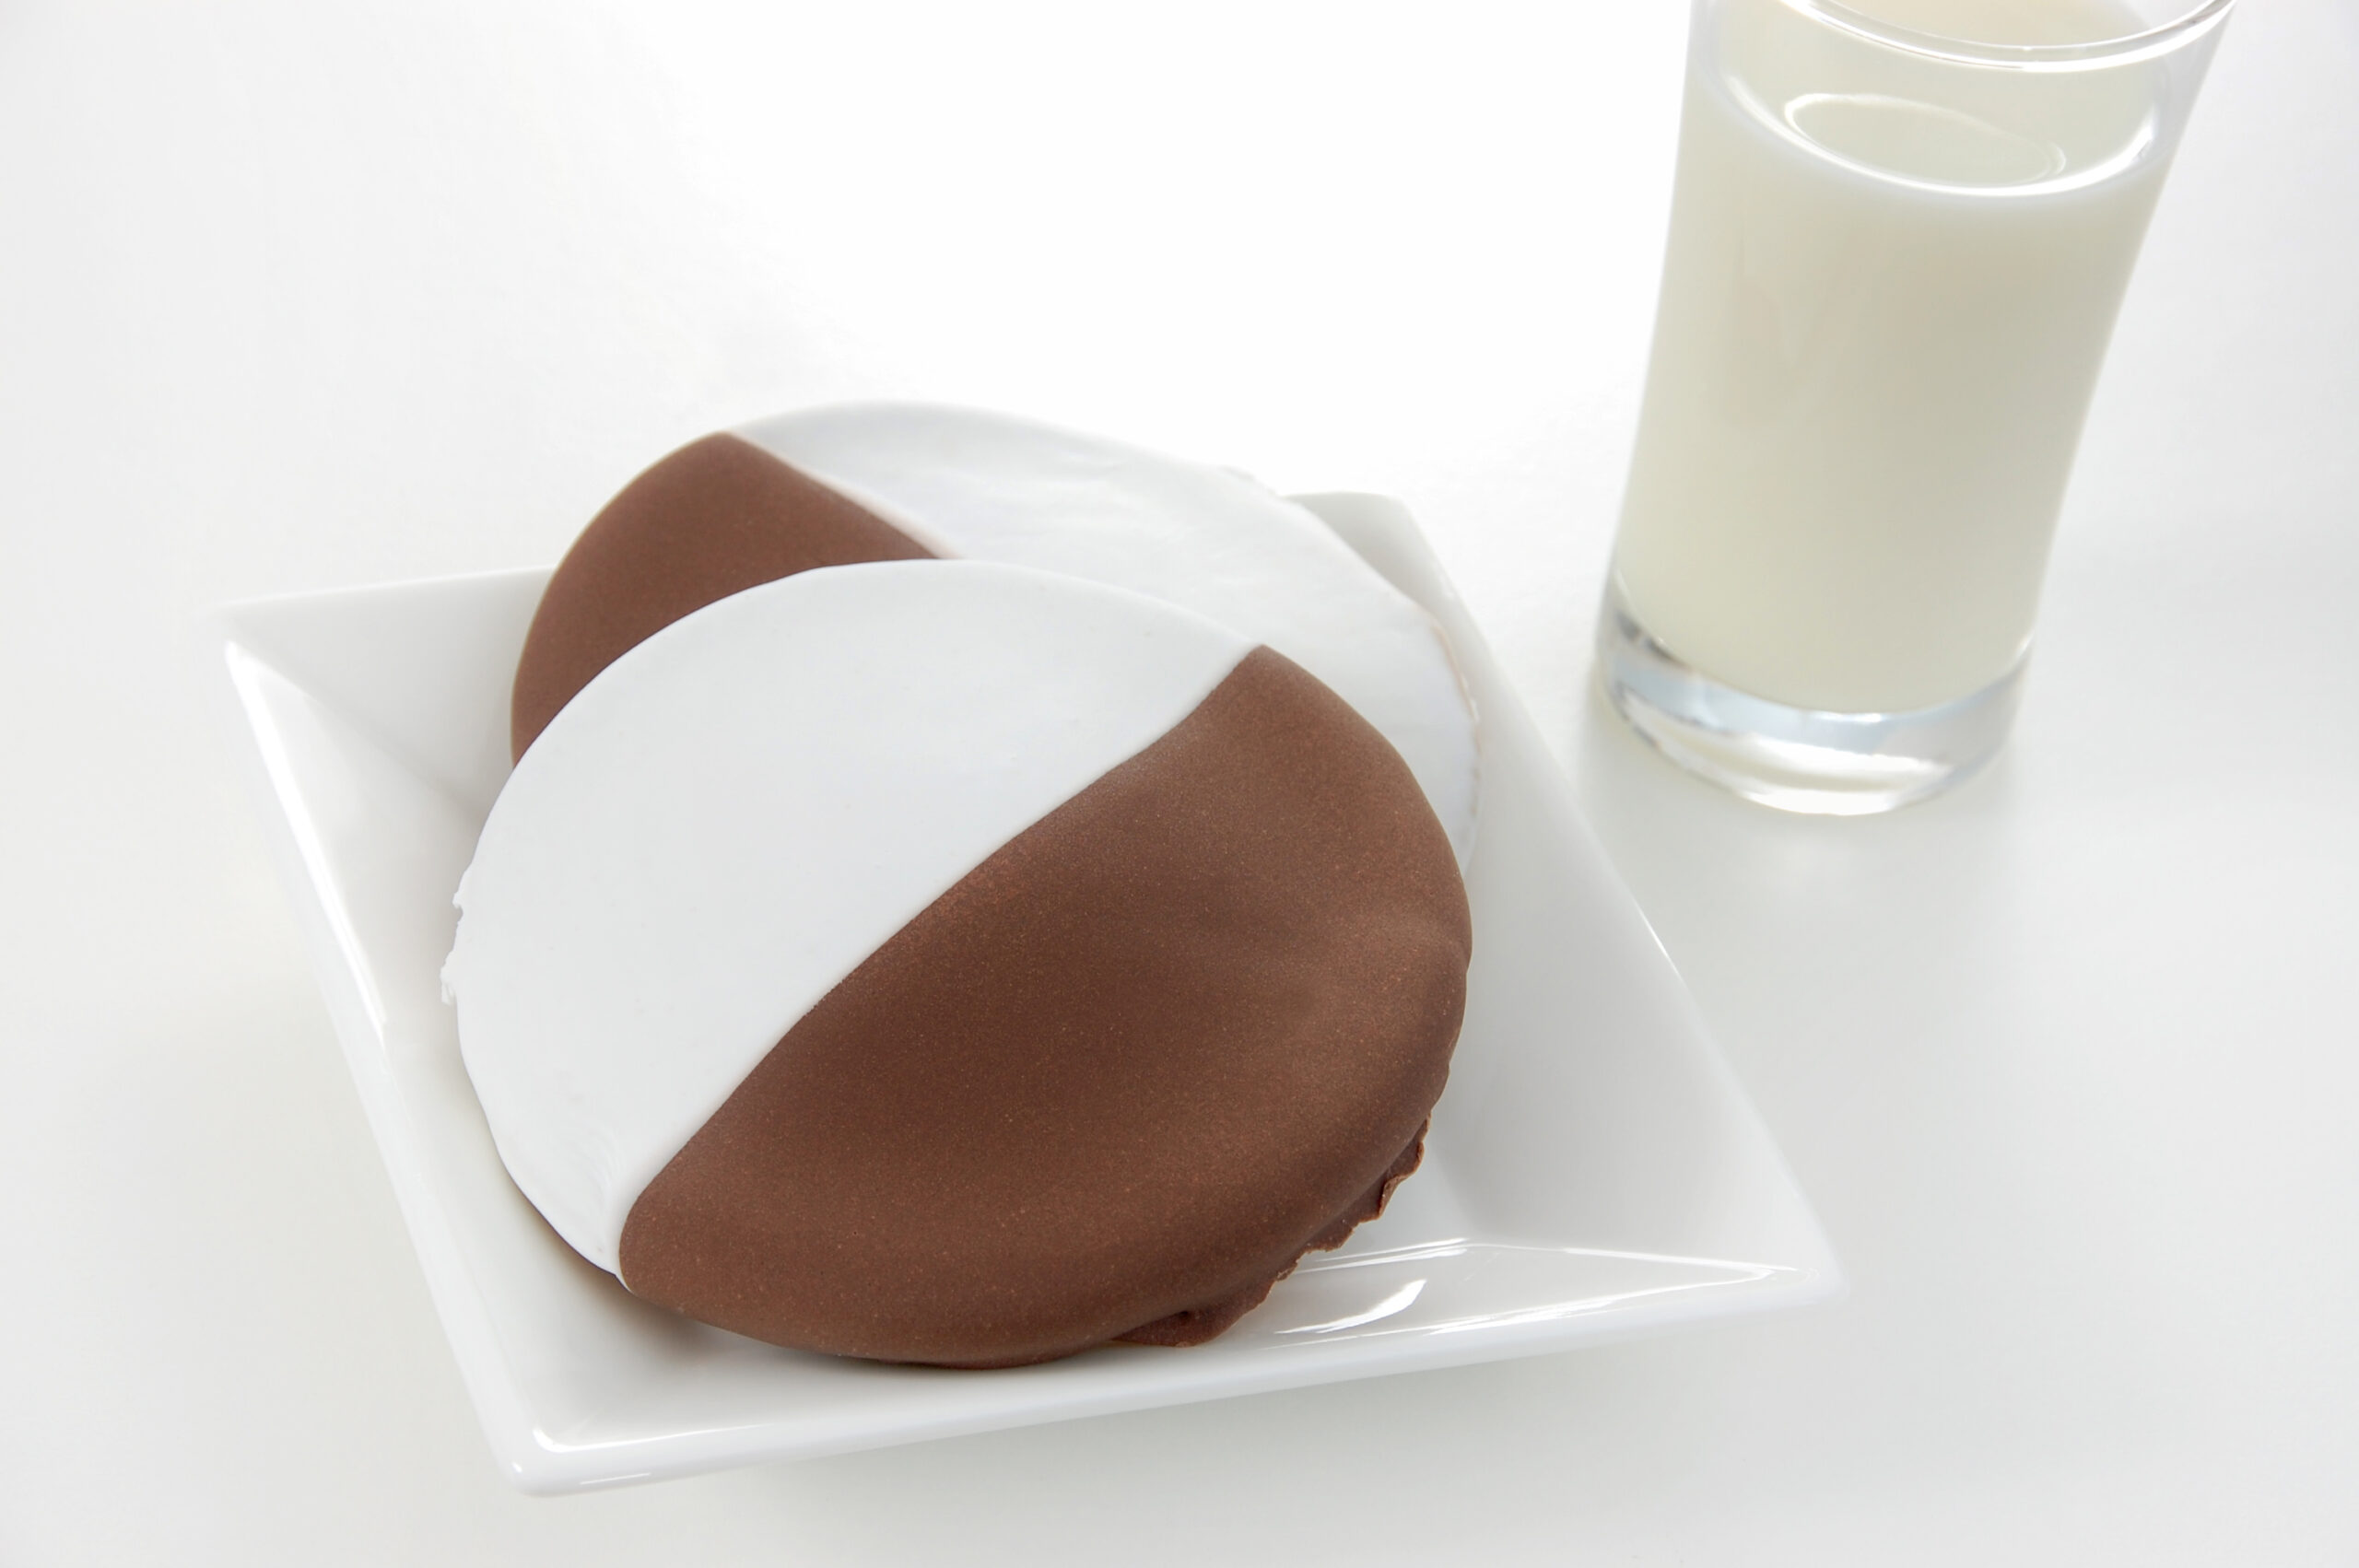 American traditional black and white or half moon cookies served with a glass of cold milk.